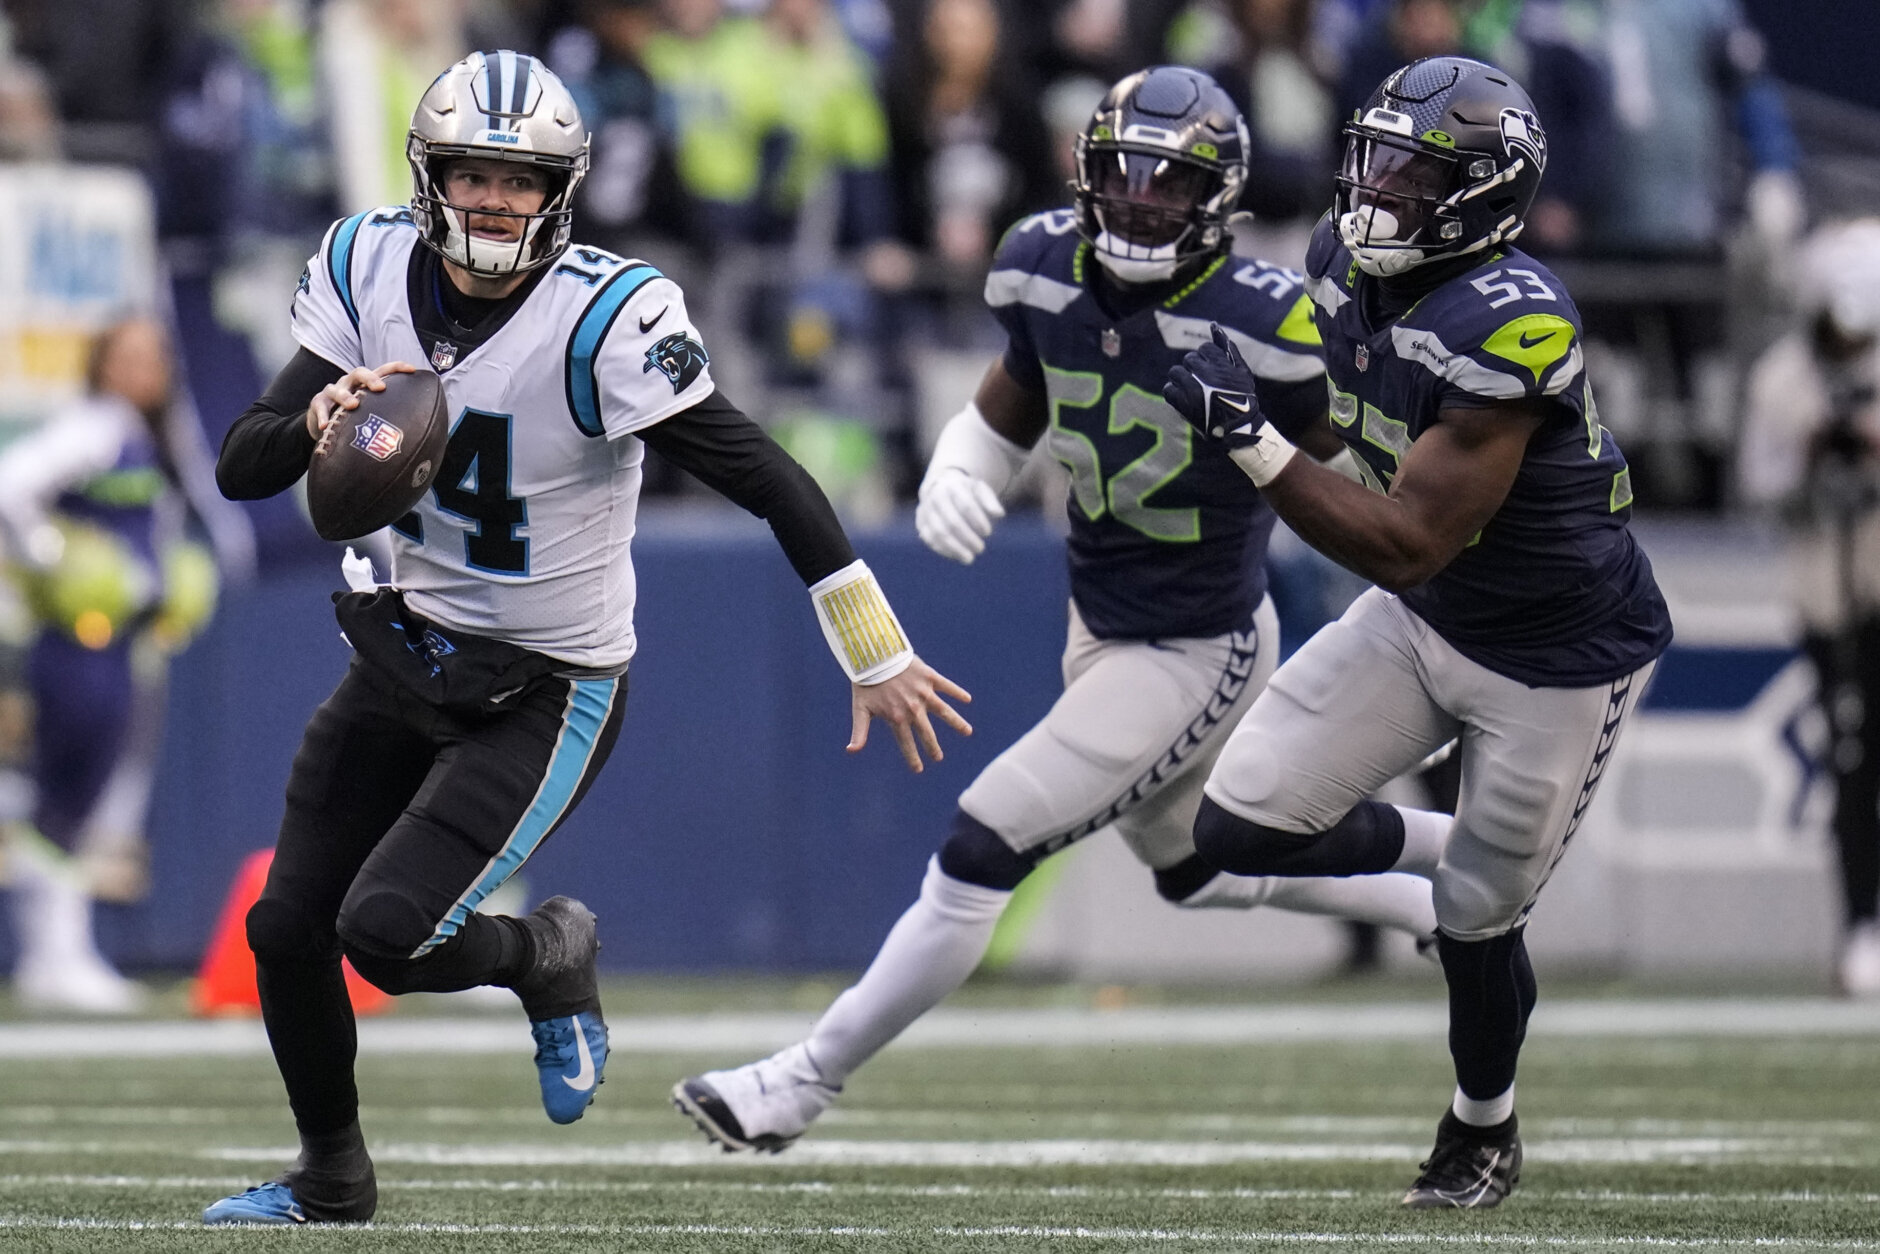 <p><em><strong>Panthers 30</strong></em><br />
<em><strong>Seahawks 24</strong></em></p>
<p>Am I the only one who feels like this result hurts Washington as much as it helps? Seattle&#8217;s loss pushed the Commanders into control of the 6-seed in the NFC but the Burgundy and Gold historically do their best work with their backs against the wall. Does this change the mojo moving forward?</p>
